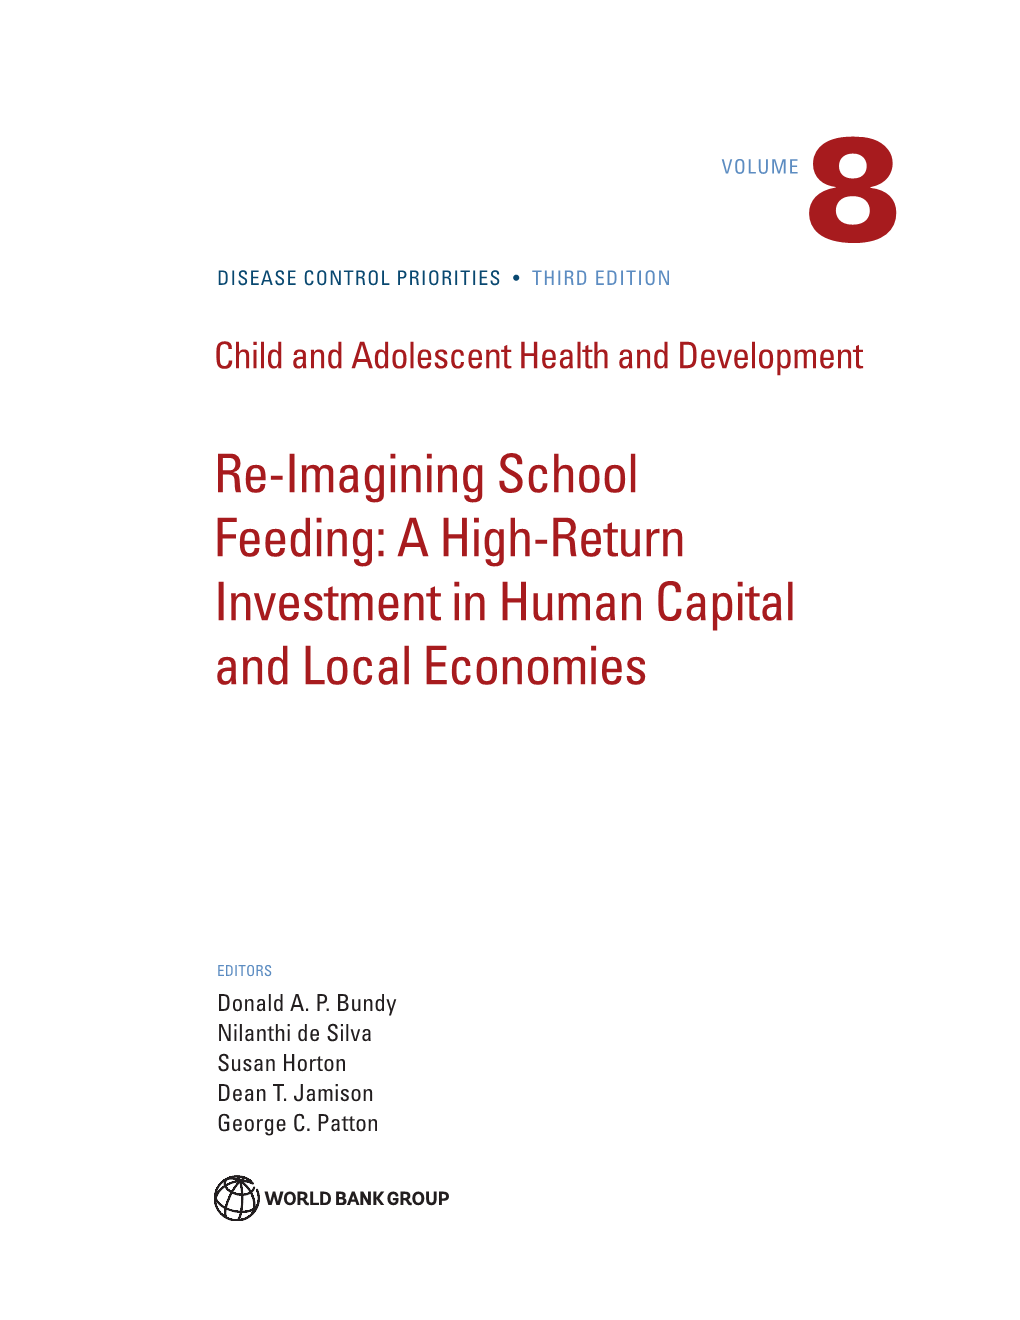 Re-Imagining School Feeding: a High-Return Investment in Human Capital and Local Economies